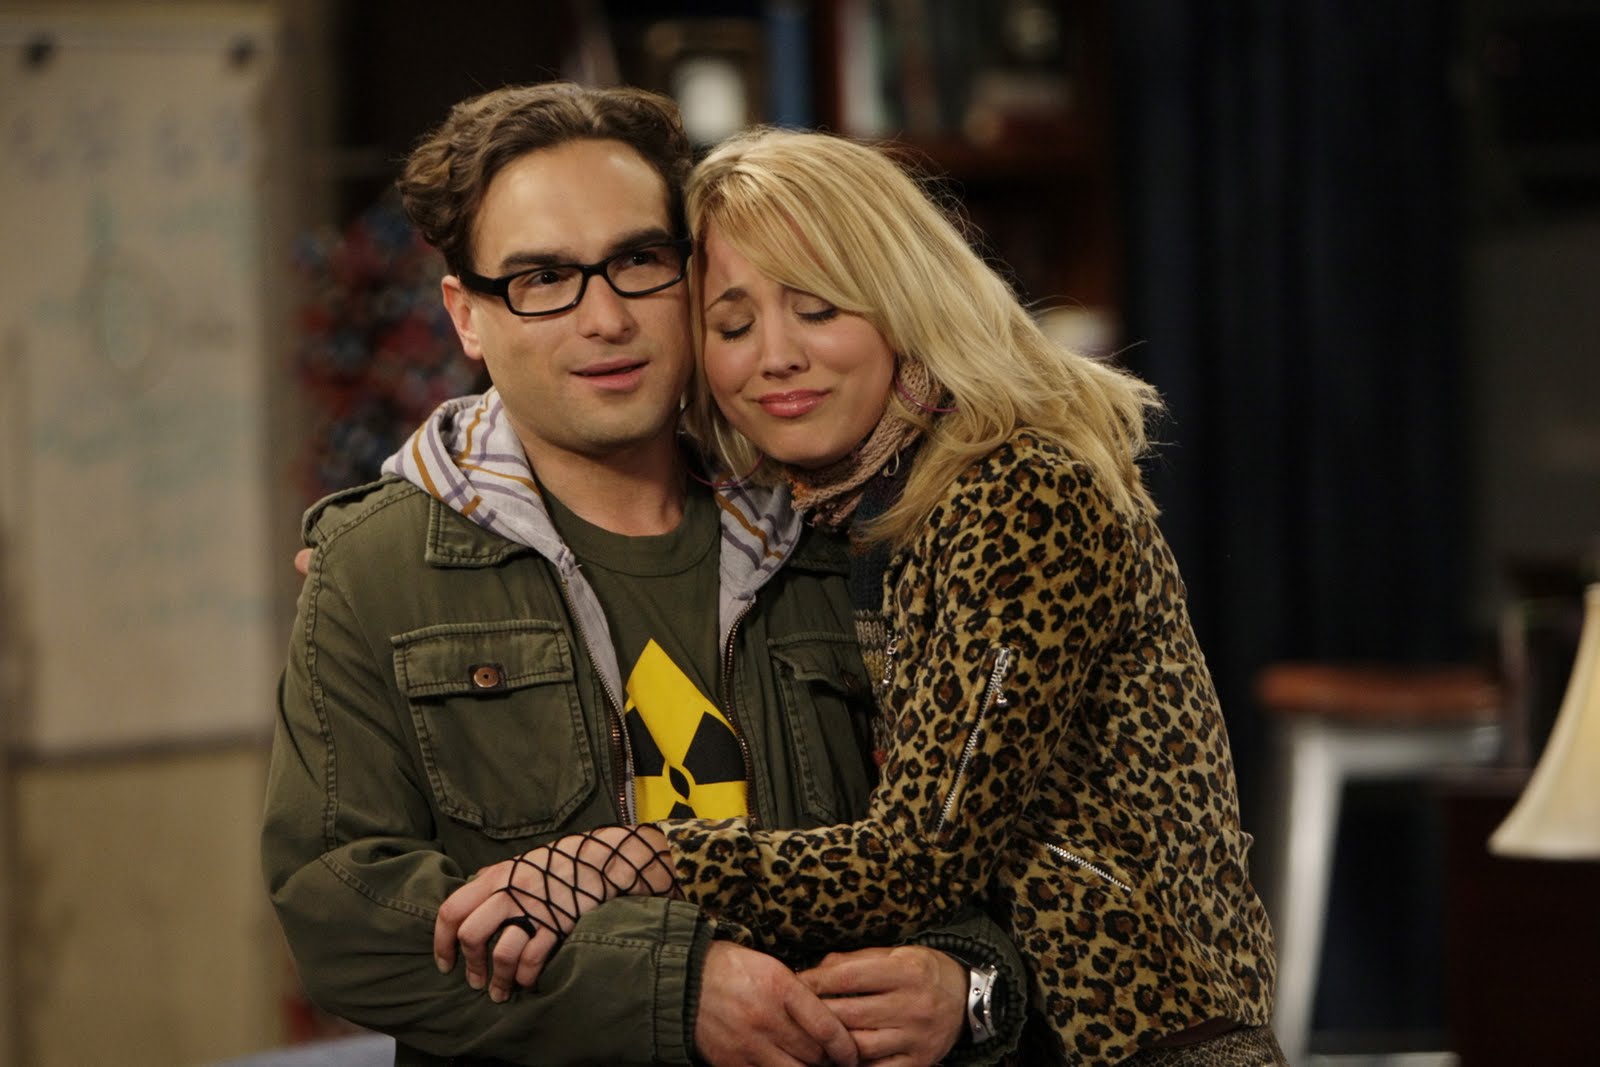 The Big Bang Theory Emmy Awards Nominee HD Wallpapers| HD Wallpapers ...